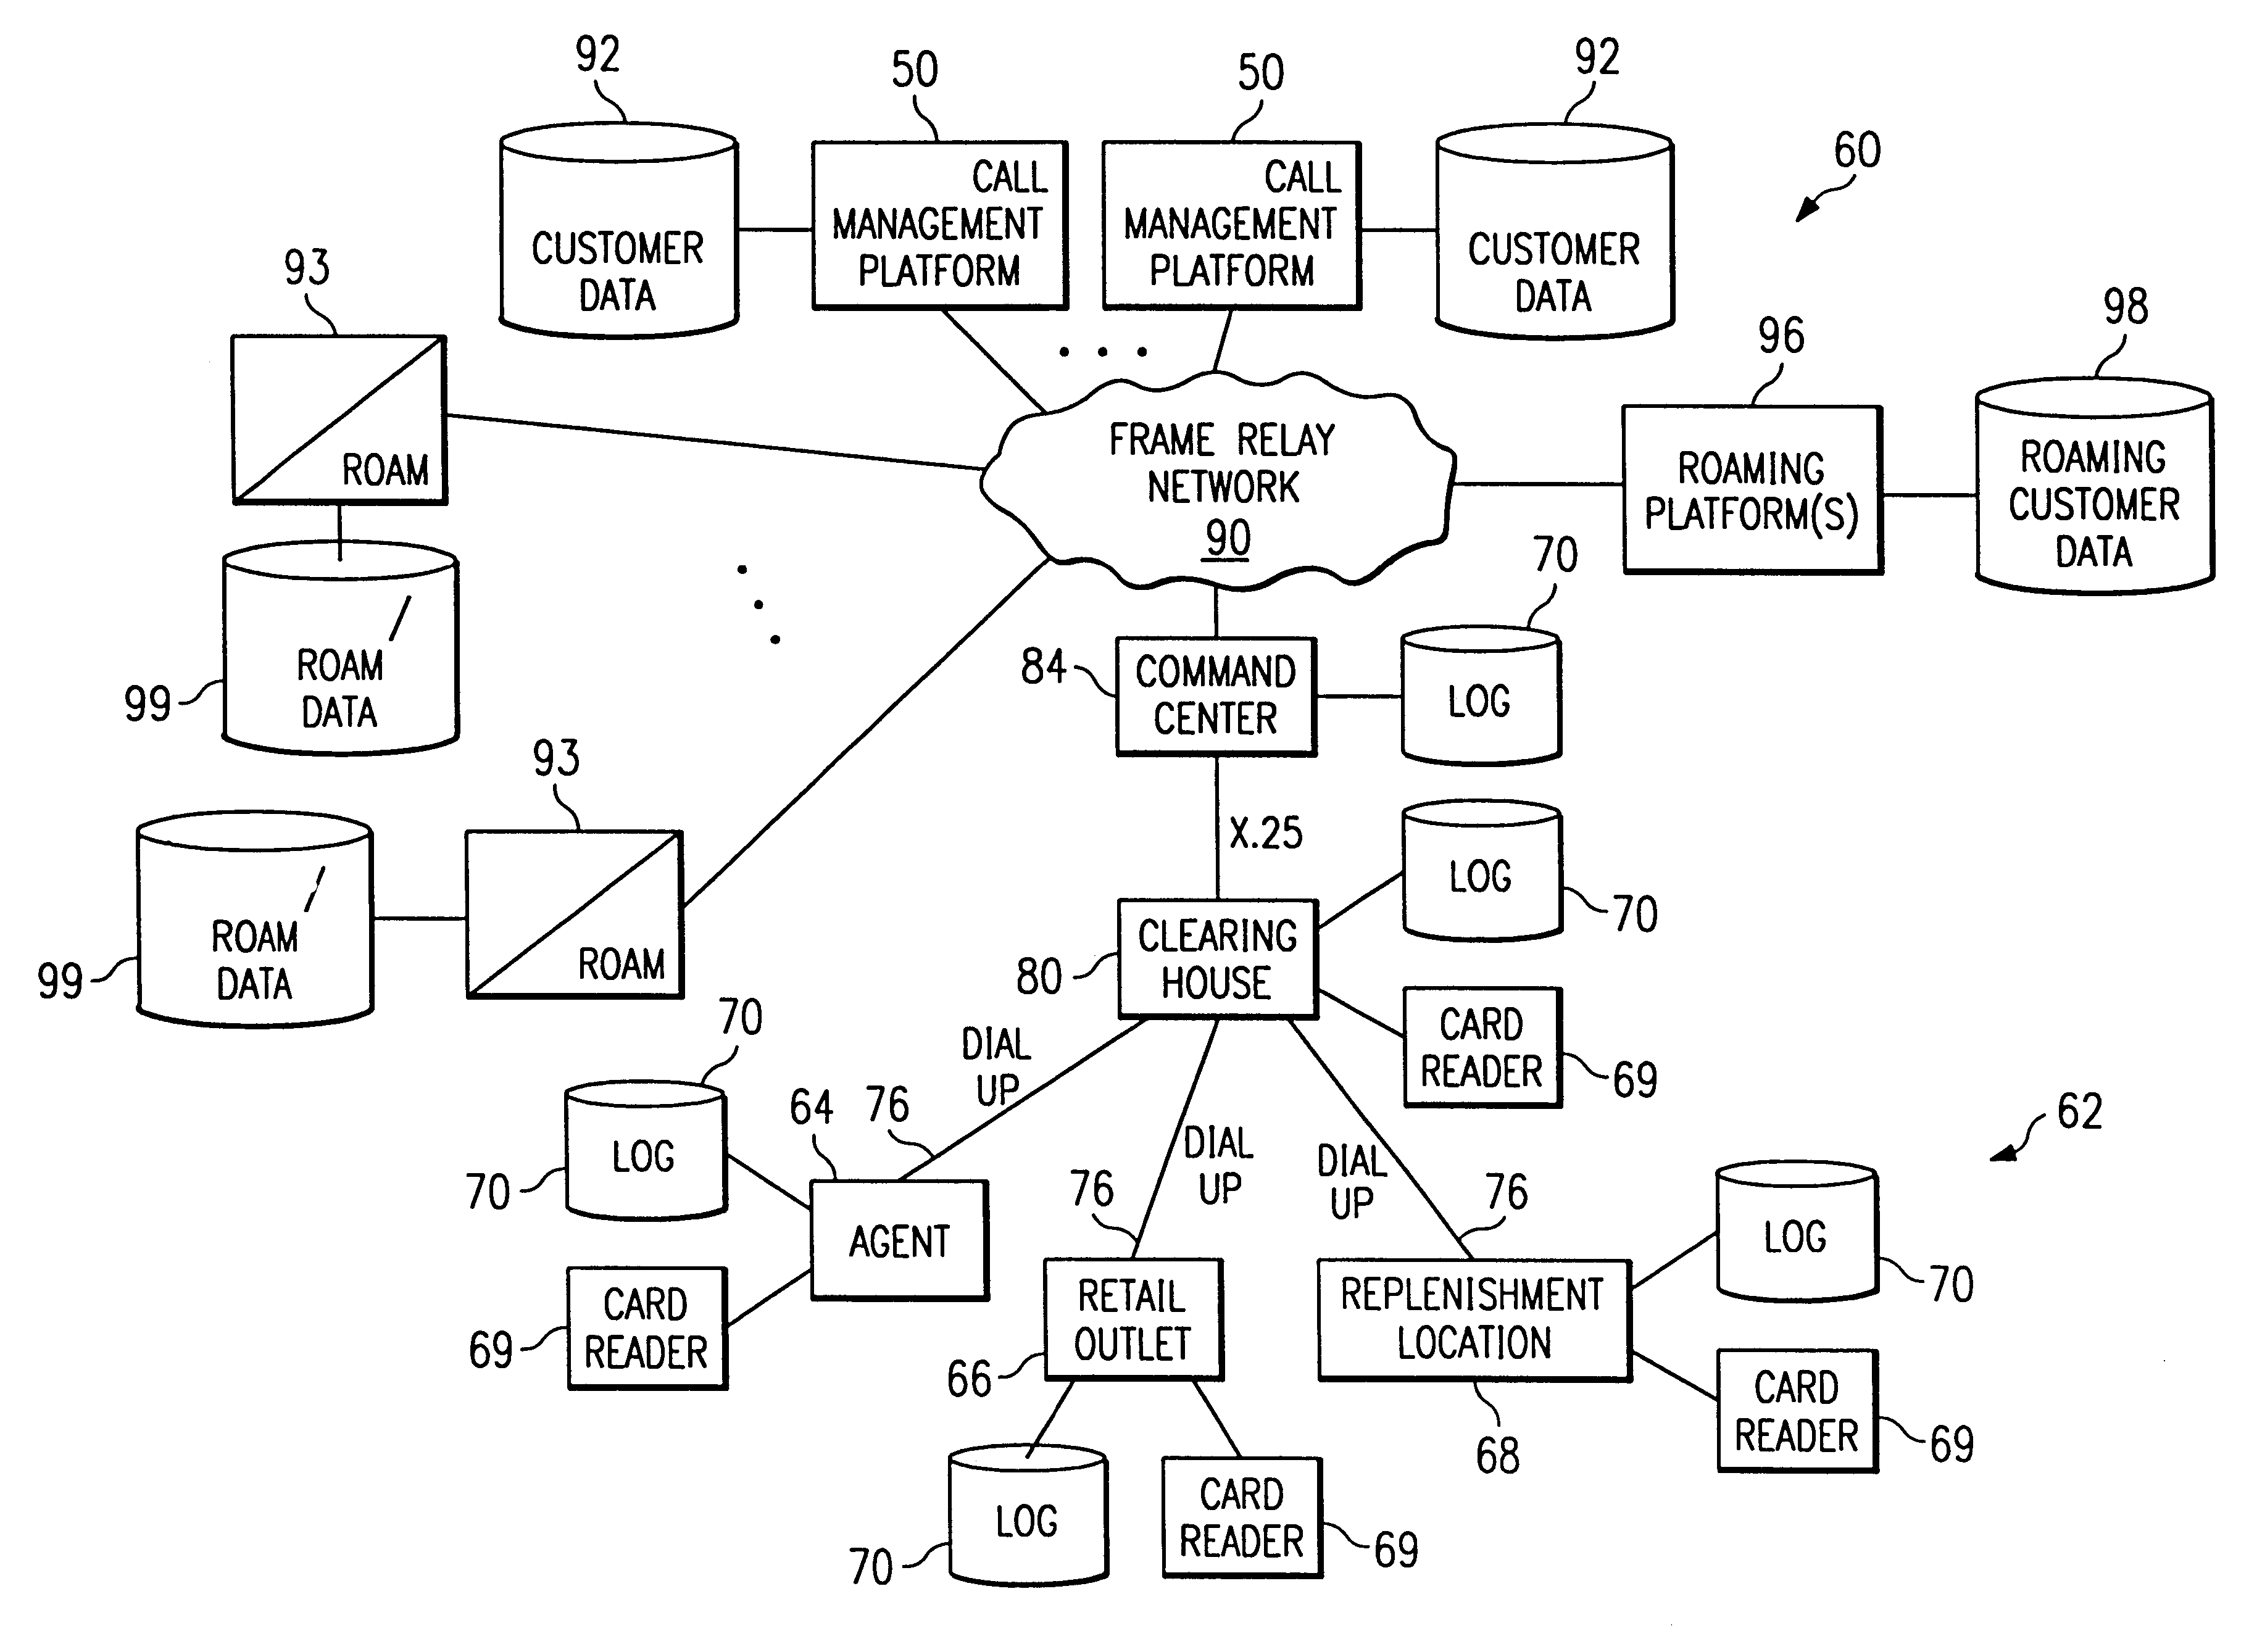 System and method for real-time bundled telecommunications account processing and billing